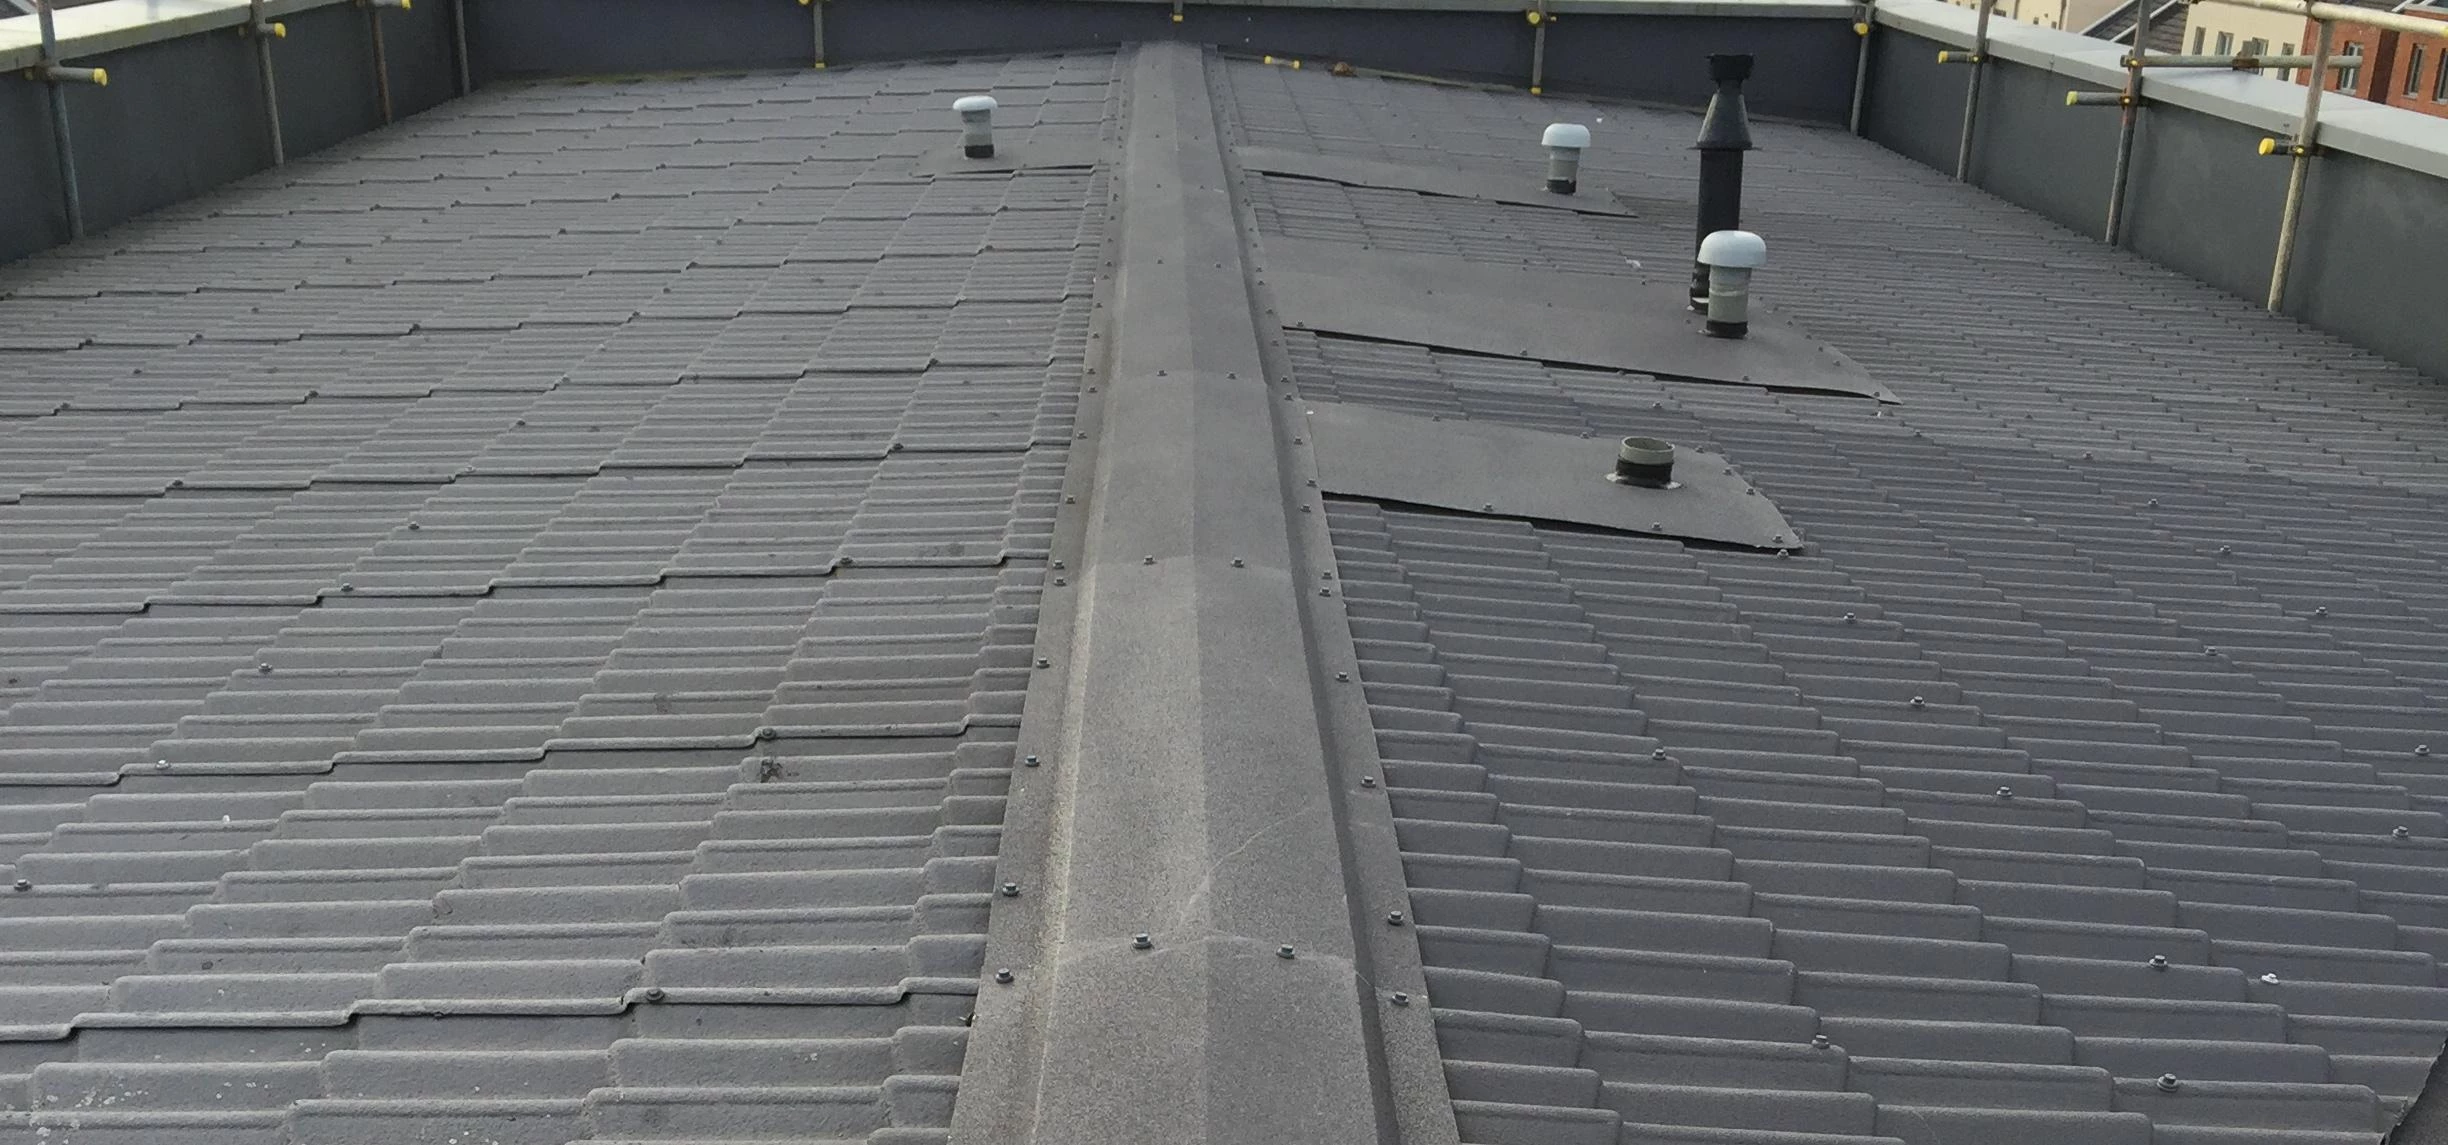 The metal sheet roof in Plymouth repaired by Martin-Brooks, on behalf of Redrow Homes. 